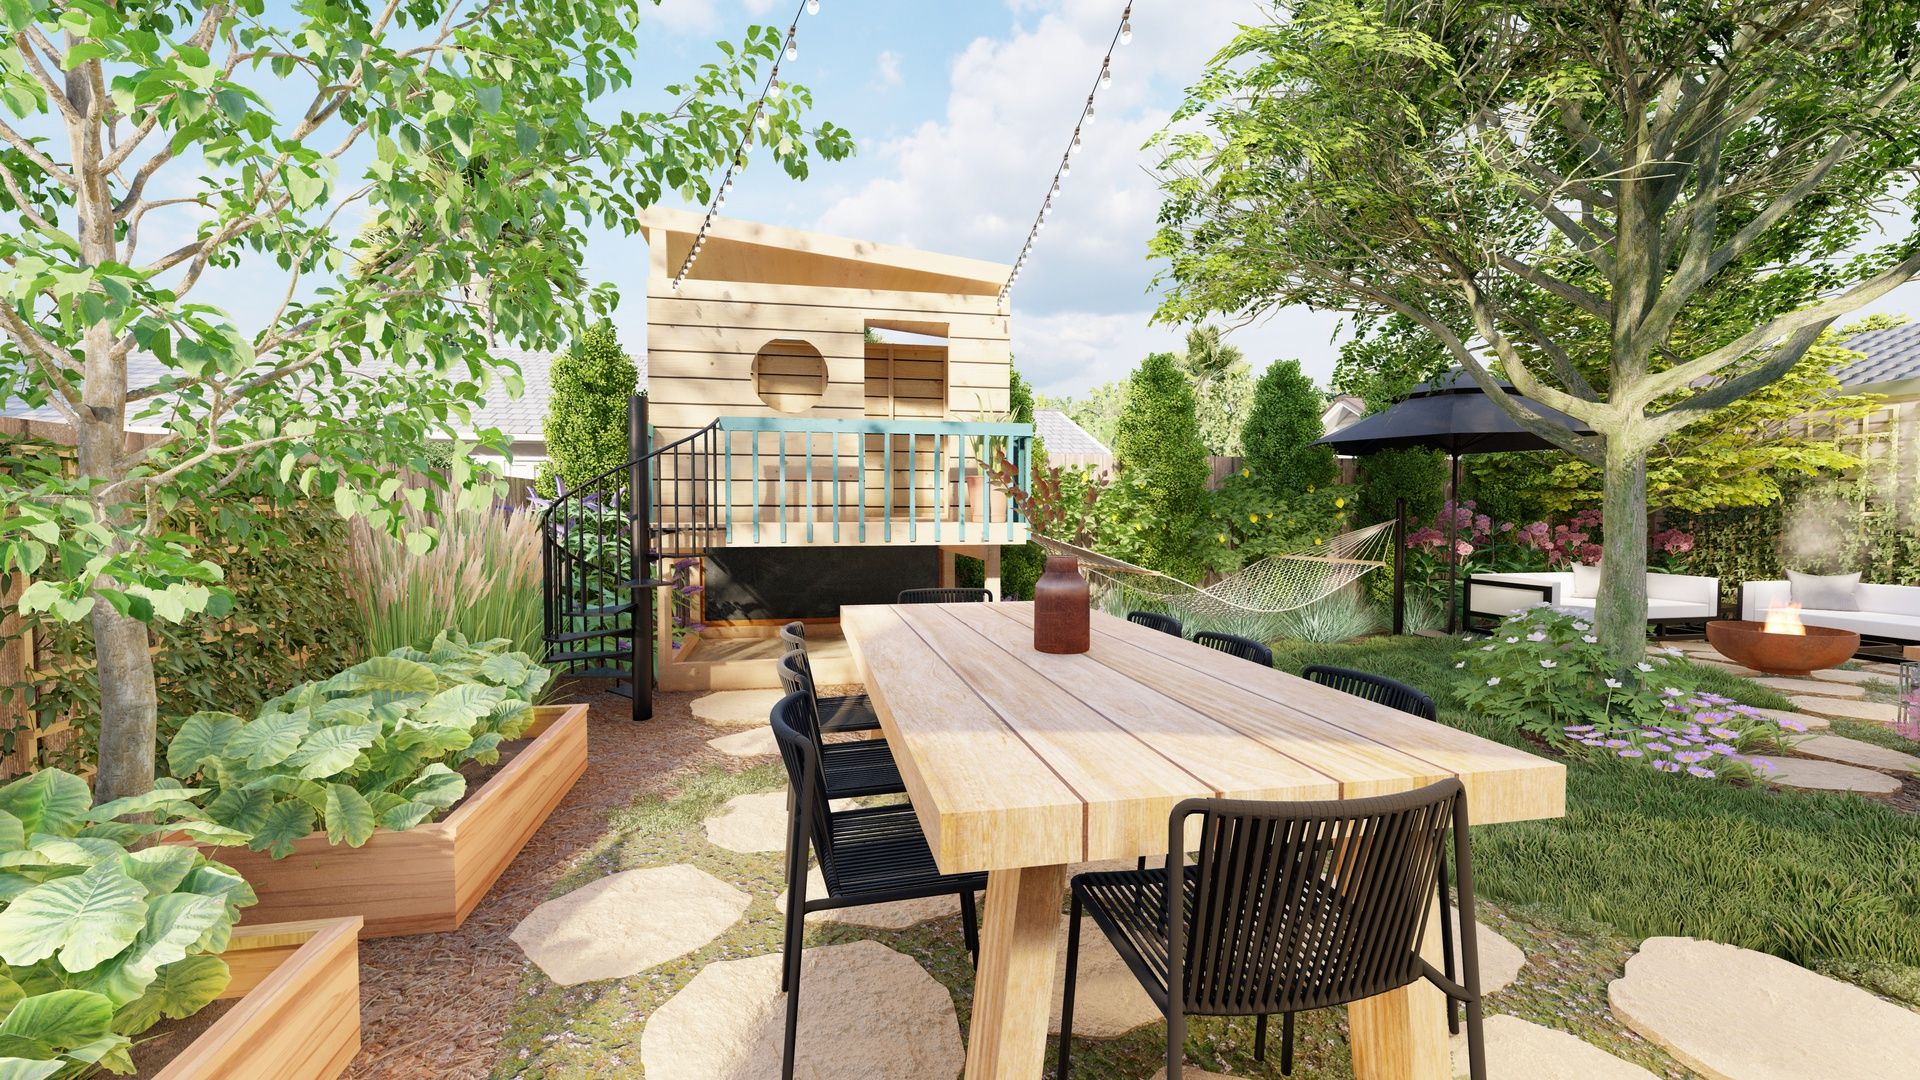 a play house for kids next to a vegetable garden, dining area and fire pit nook in a small backyard landscape design